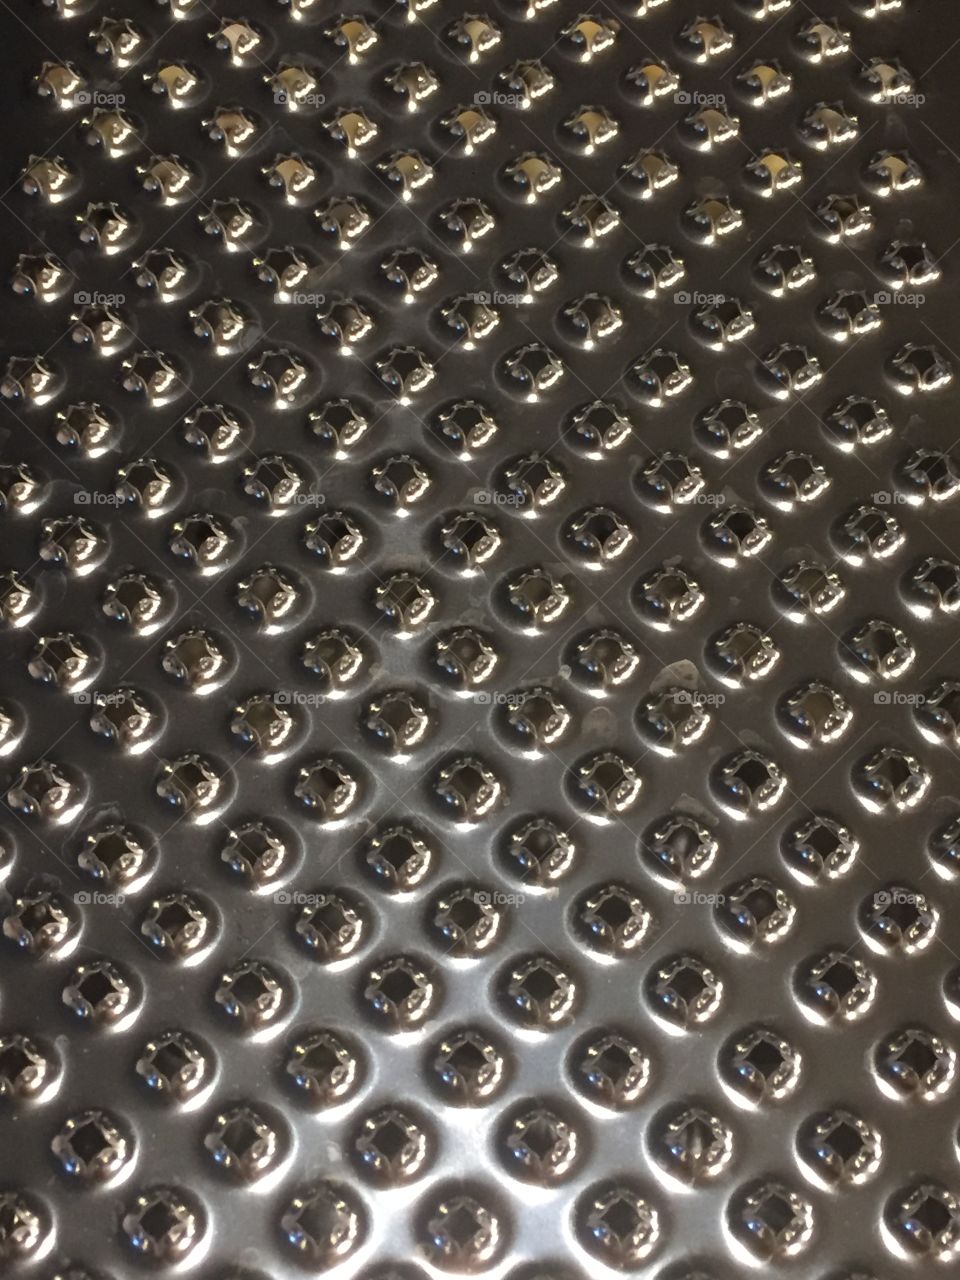 Inside a cheese grater 